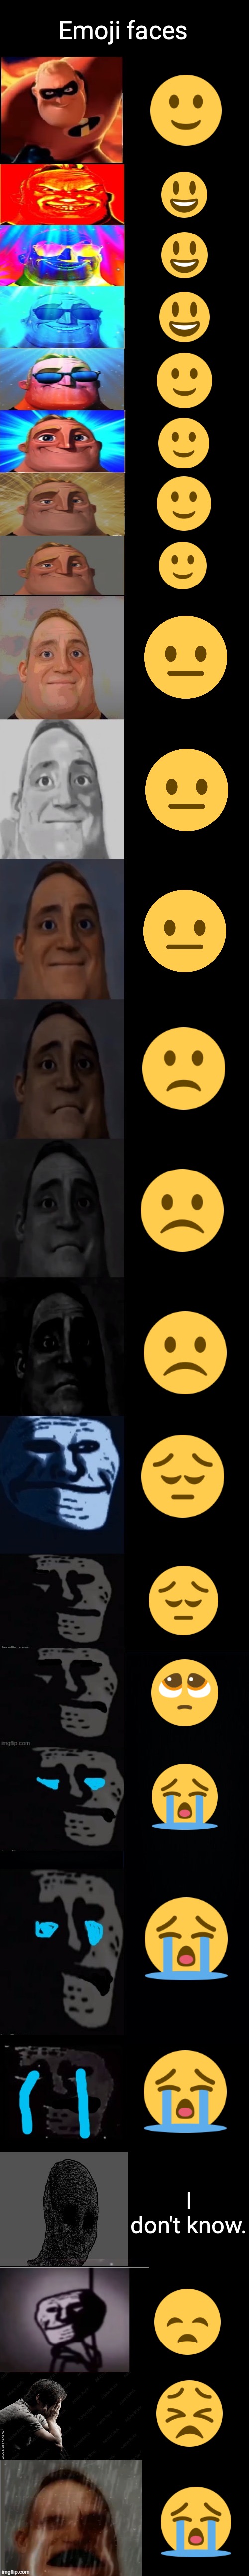 Here are the emoji faces of mr incredible becoming sad 3rd extension. | Emoji faces; I don't know. | image tagged in mr incredible becoming sad 3rd extension,fun,memes,uncanny,mr incredible becoming uncanny,mr incredible | made w/ Imgflip meme maker